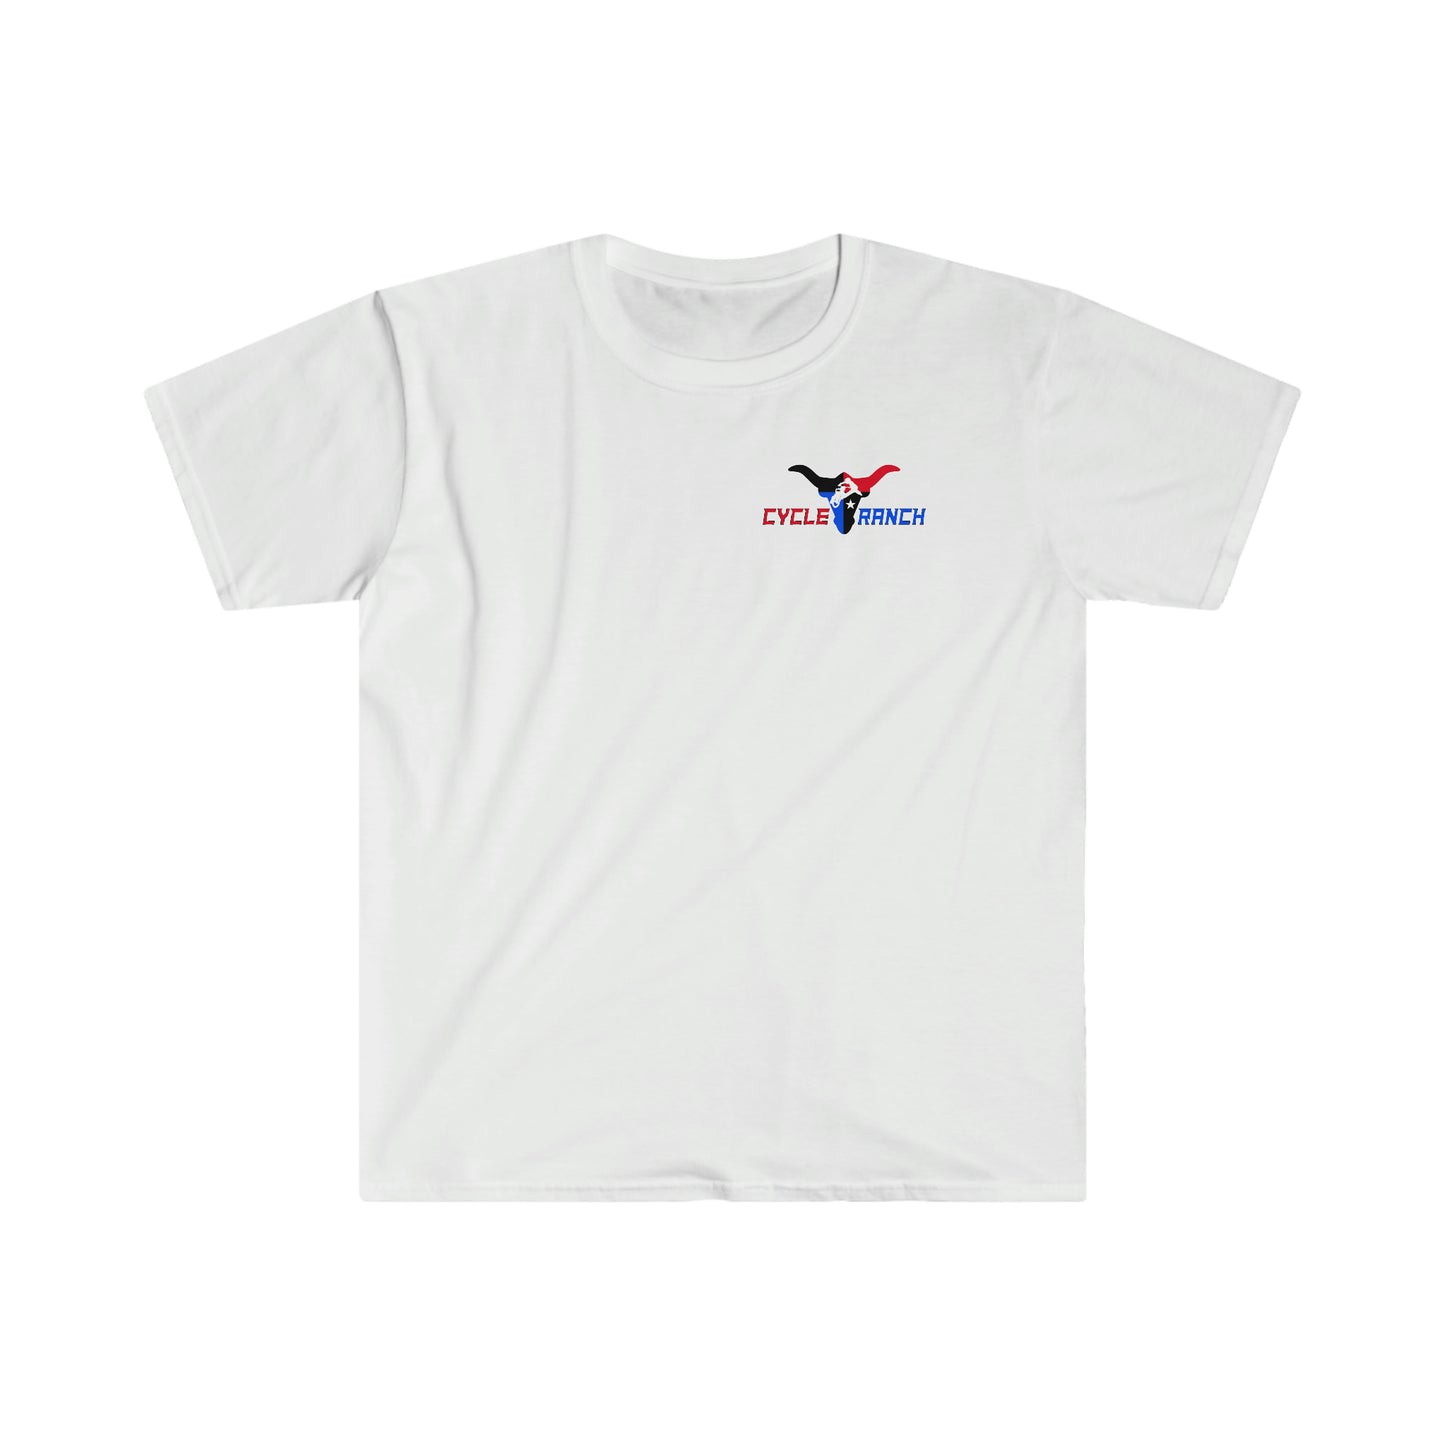 Cycle Ranch 2023 winner - Unisex Softstyle T-Shirt